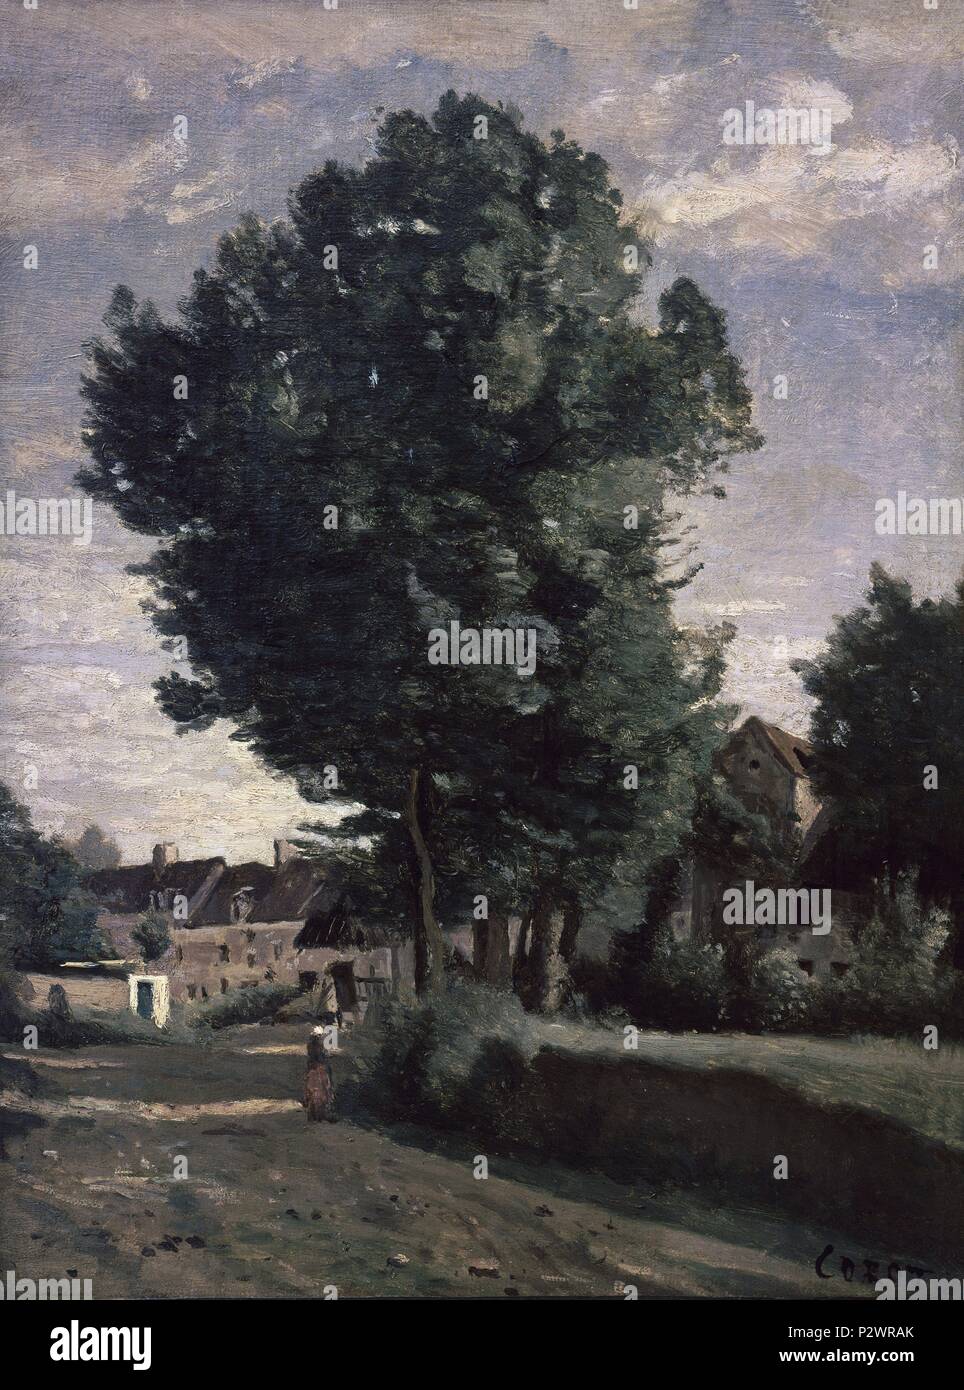 Outskirts of a village near Beauvais - ca. 1850 - 40x30 cm - oil on canvas. Author: Jean Baptiste Camille Corot (1796-1875). Location: LOUVRE MUSEUM-PAINTINGS, FRANCE. Also known as: ENTRADA DE ALDEA. Stock Photo